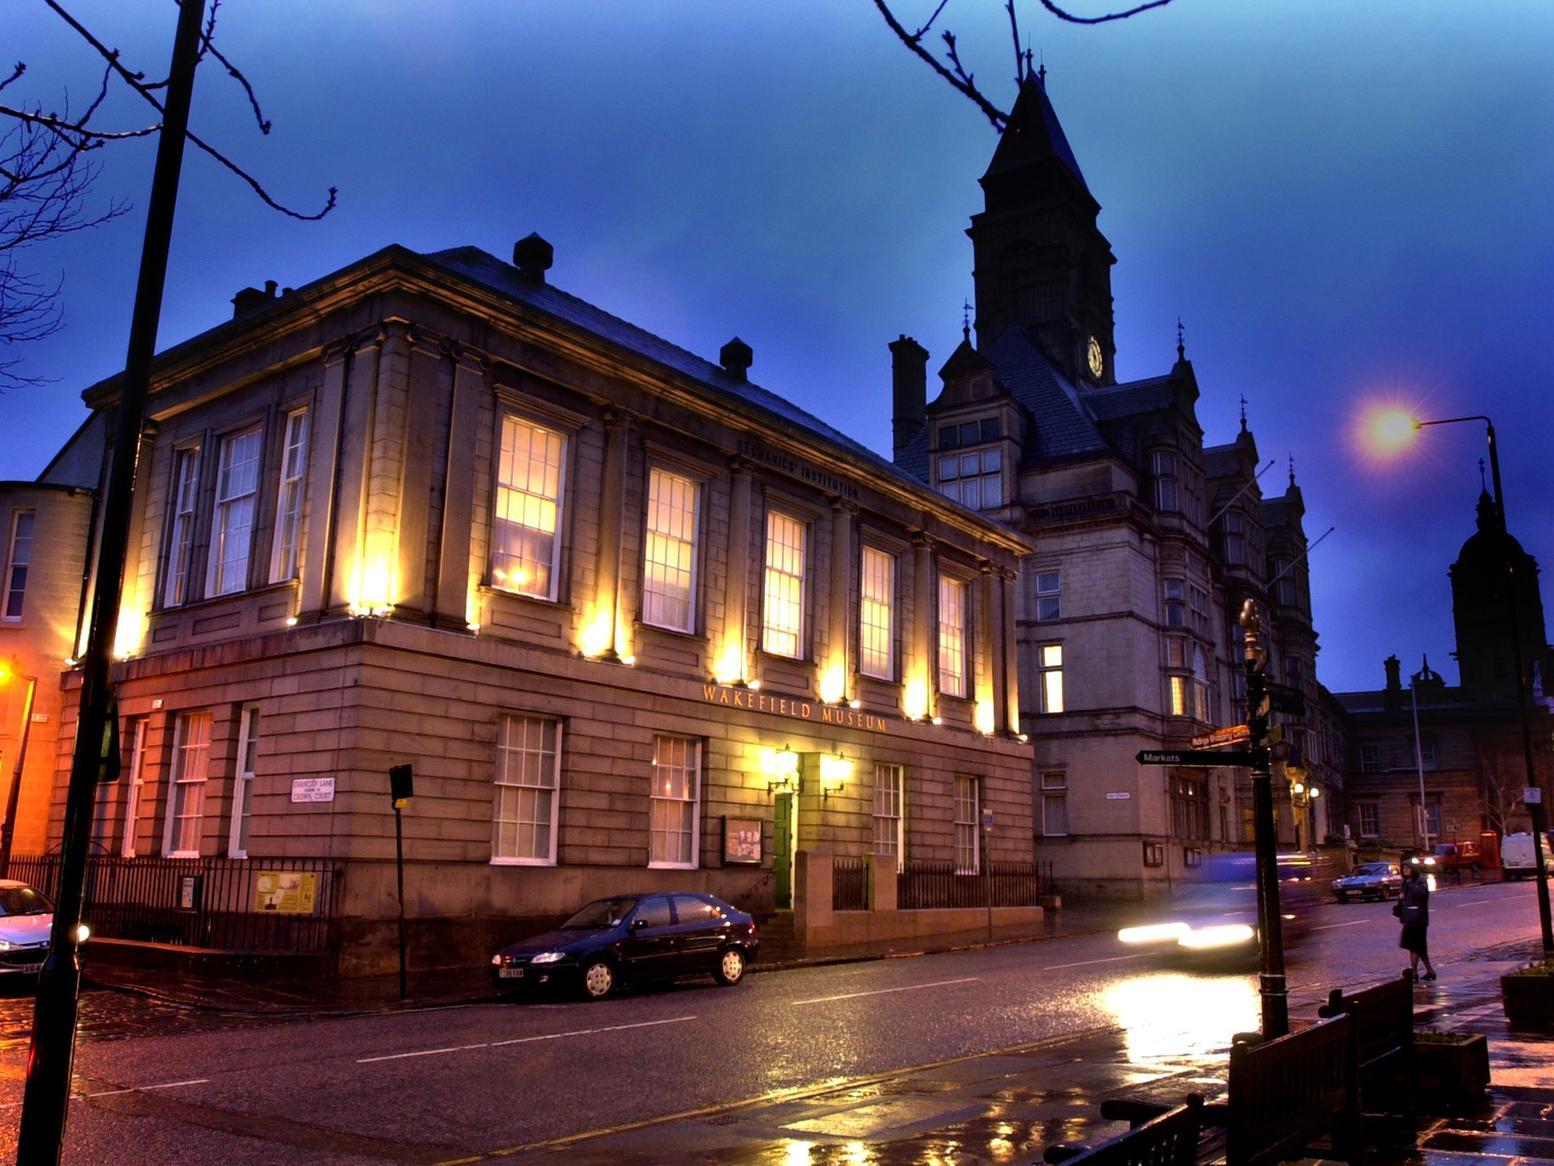 A new lighting scheme - the work of artist and lighting expert Charles Quick - was switched on at Wakefield Museum.